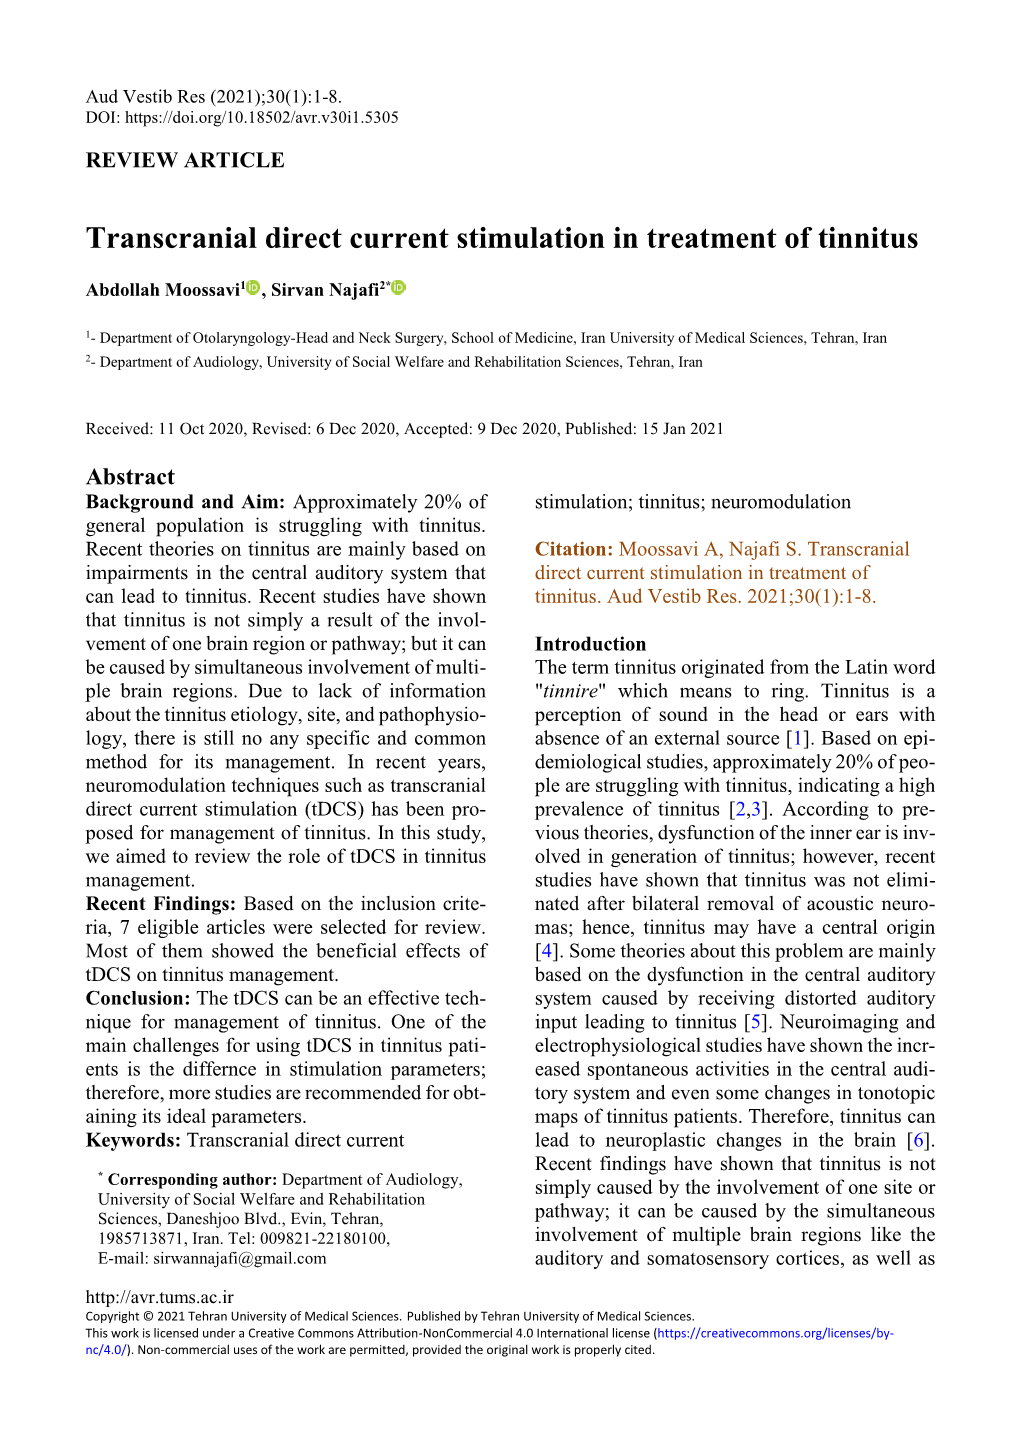 Transcranial Direct Current Stimulation in Treatment of Tinnitus